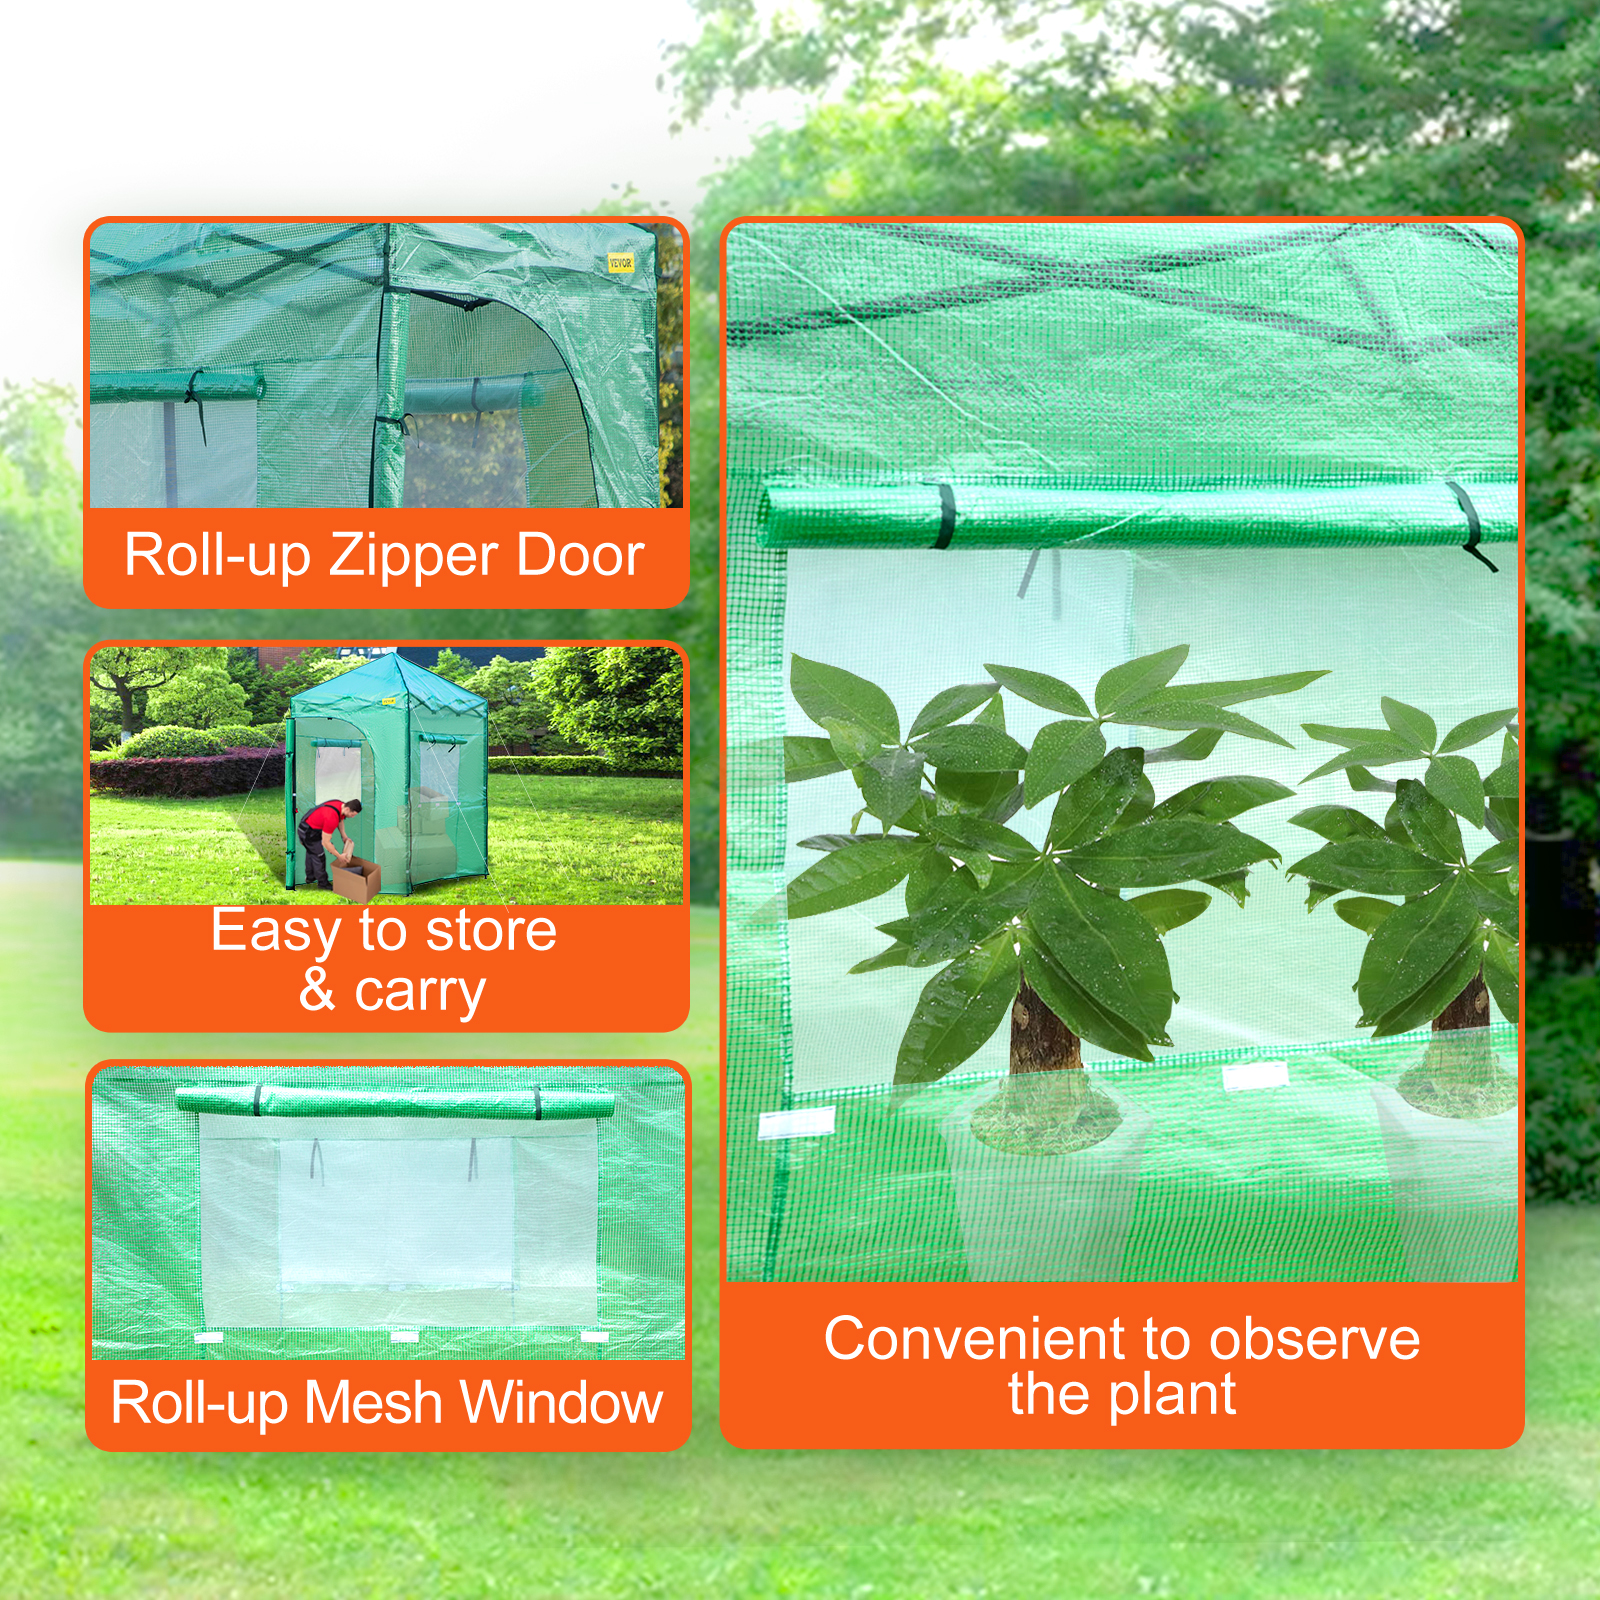  VEVOR Pop Up Greenhouse, 8 x 6 x 7.5 ft Pop-up Green House,  Set Up in Minutes, High Strength PE Cover with Doors & Windows and  Powder-Coated Steel Frame, Suitable